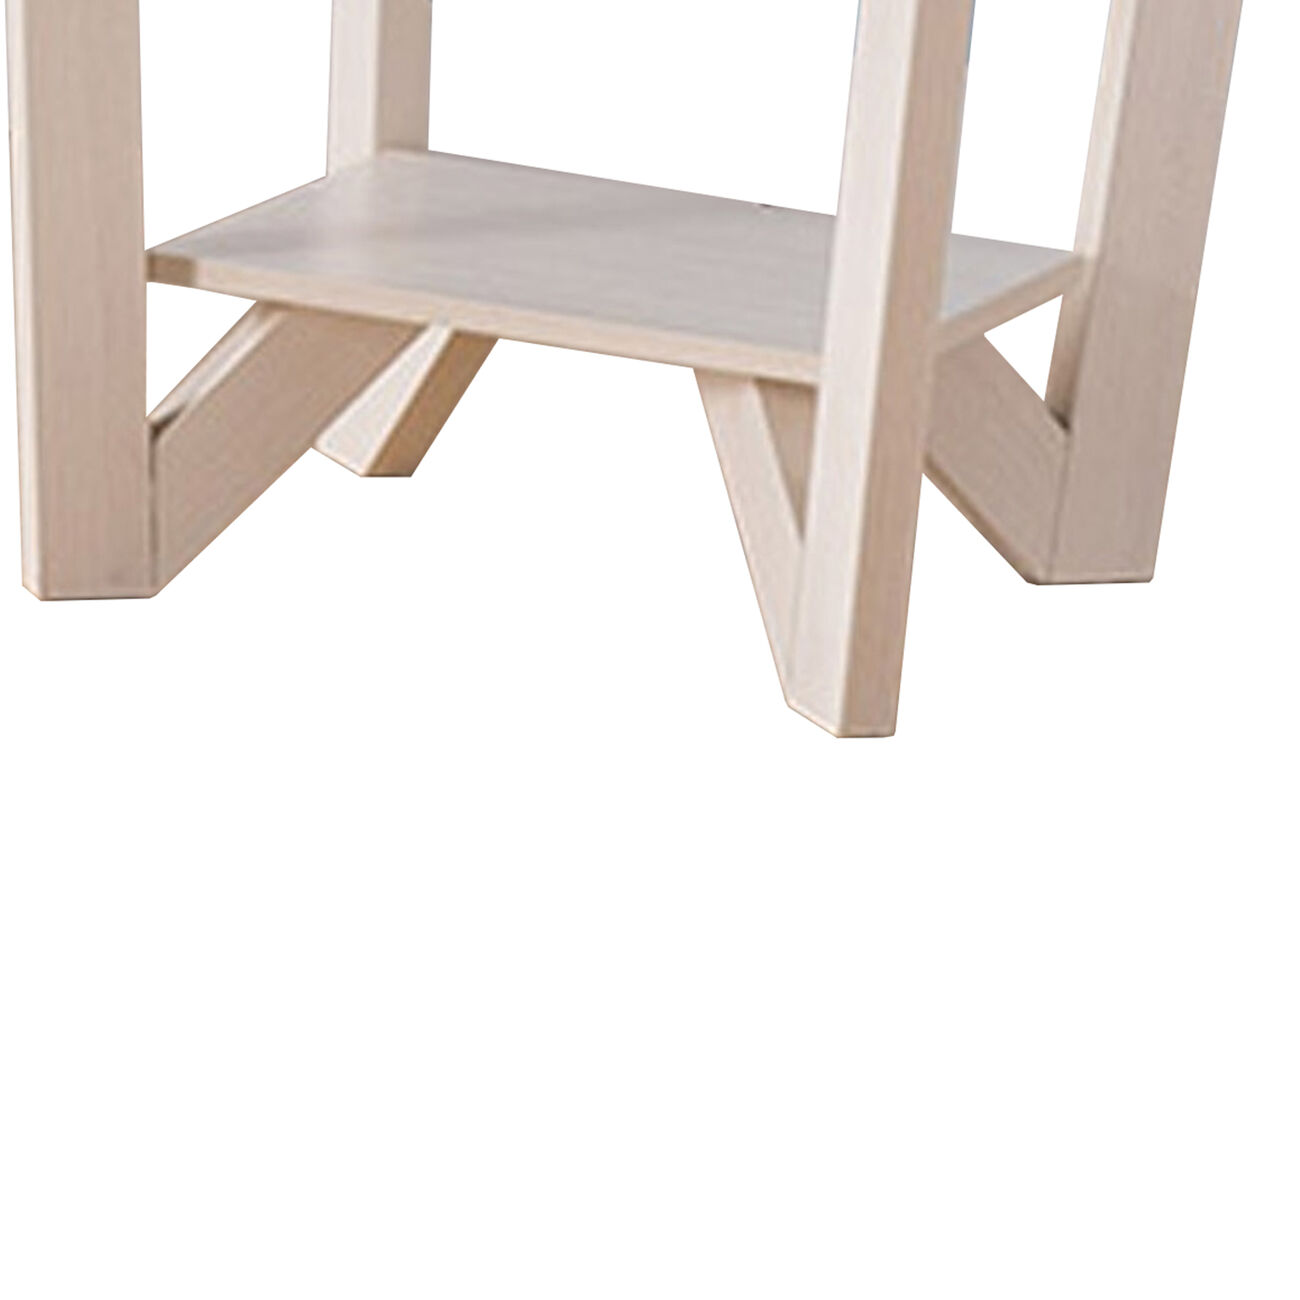 Well- Designed End Table With Display Shelf, White and brown